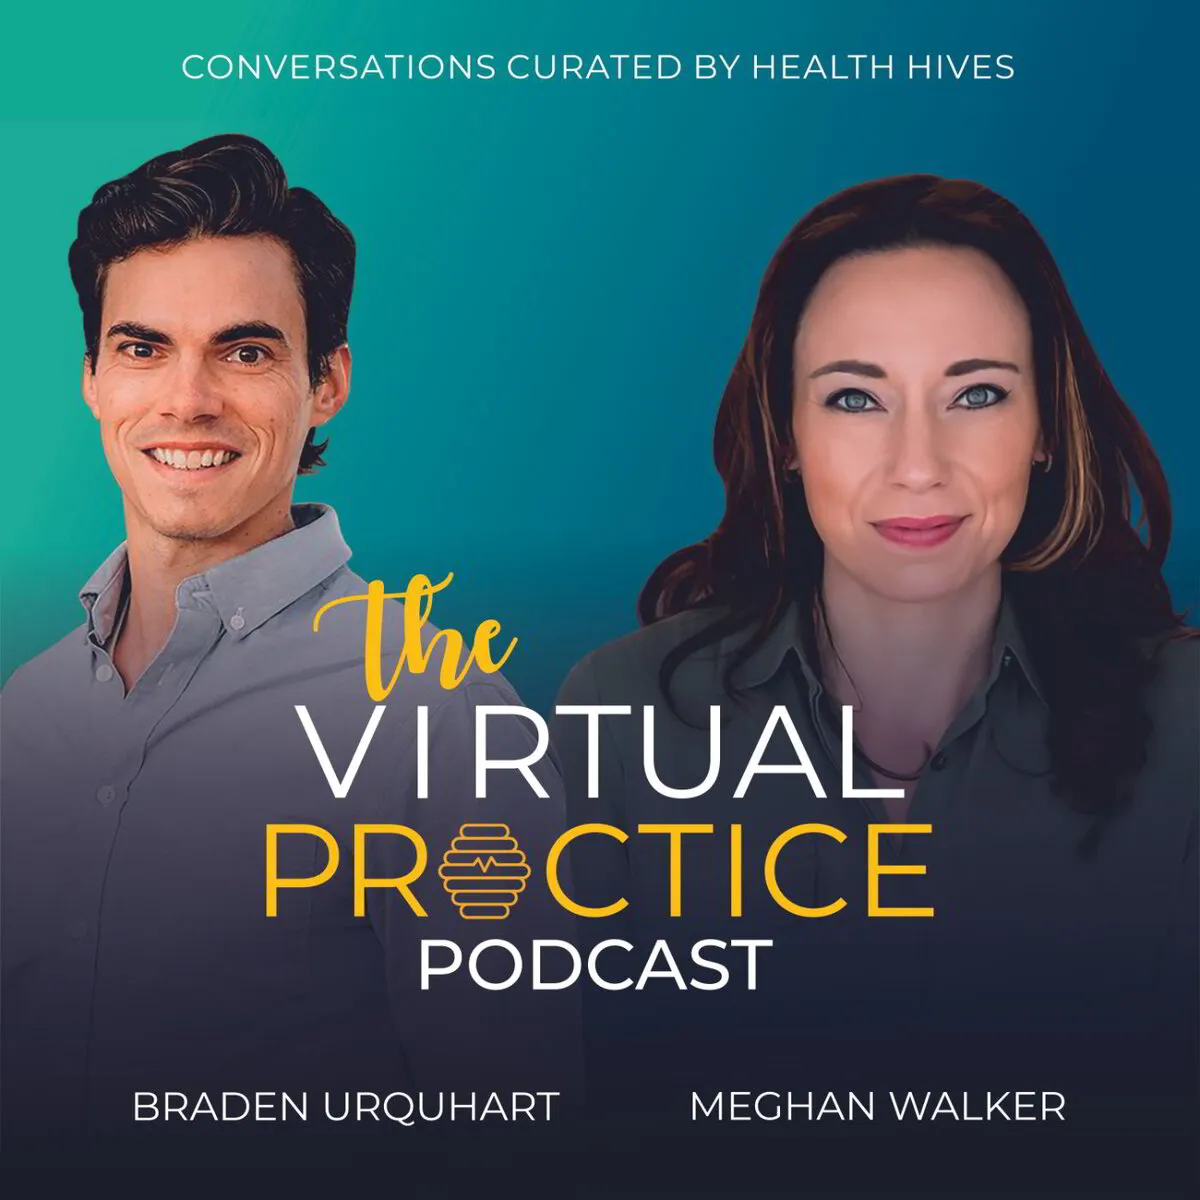 The Virtual Practice Podcast